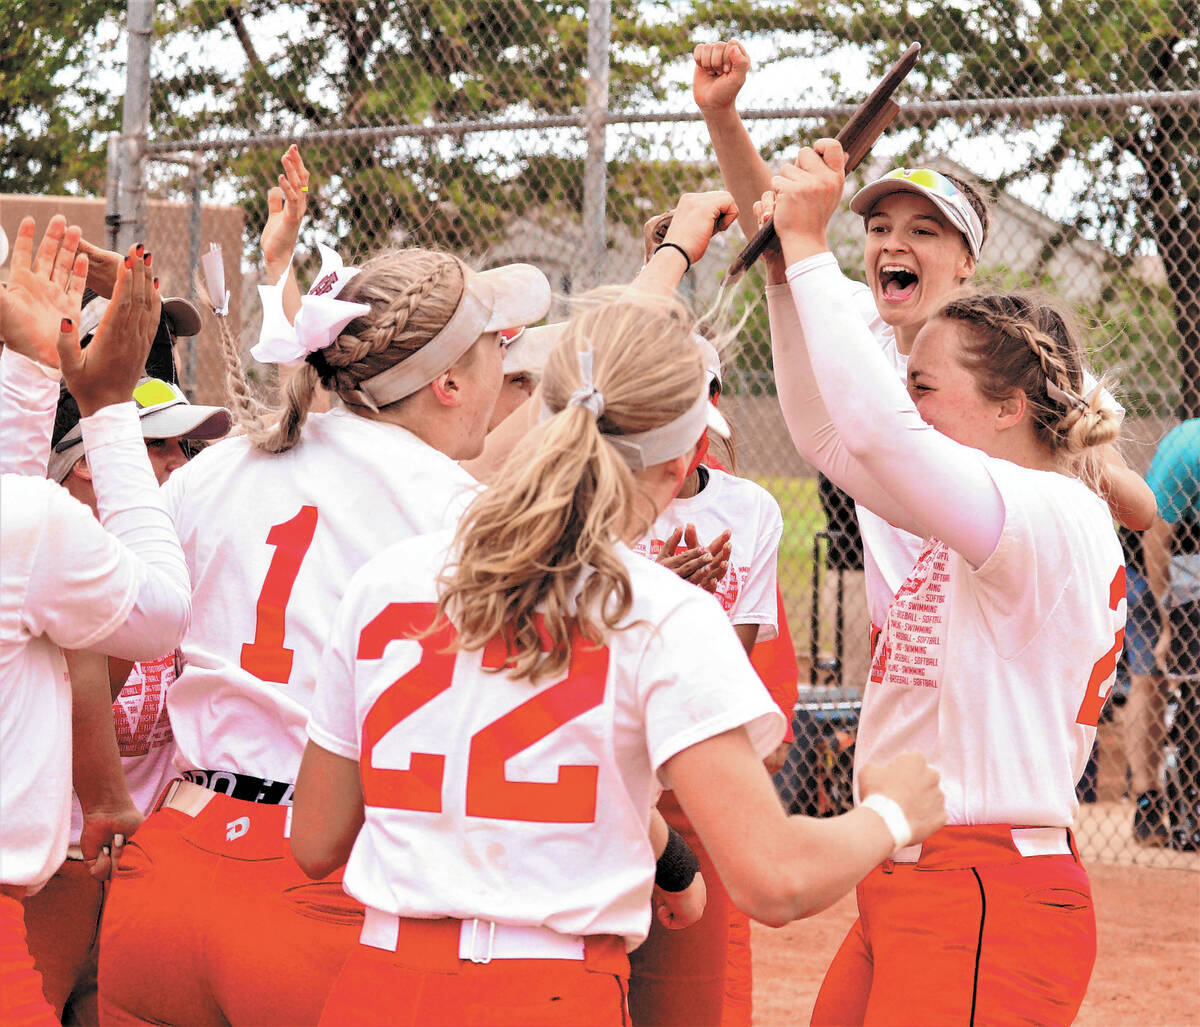 Arbor View pitcher Annie Finch (far right, holding trophy) celebrates with teammates after winn ...